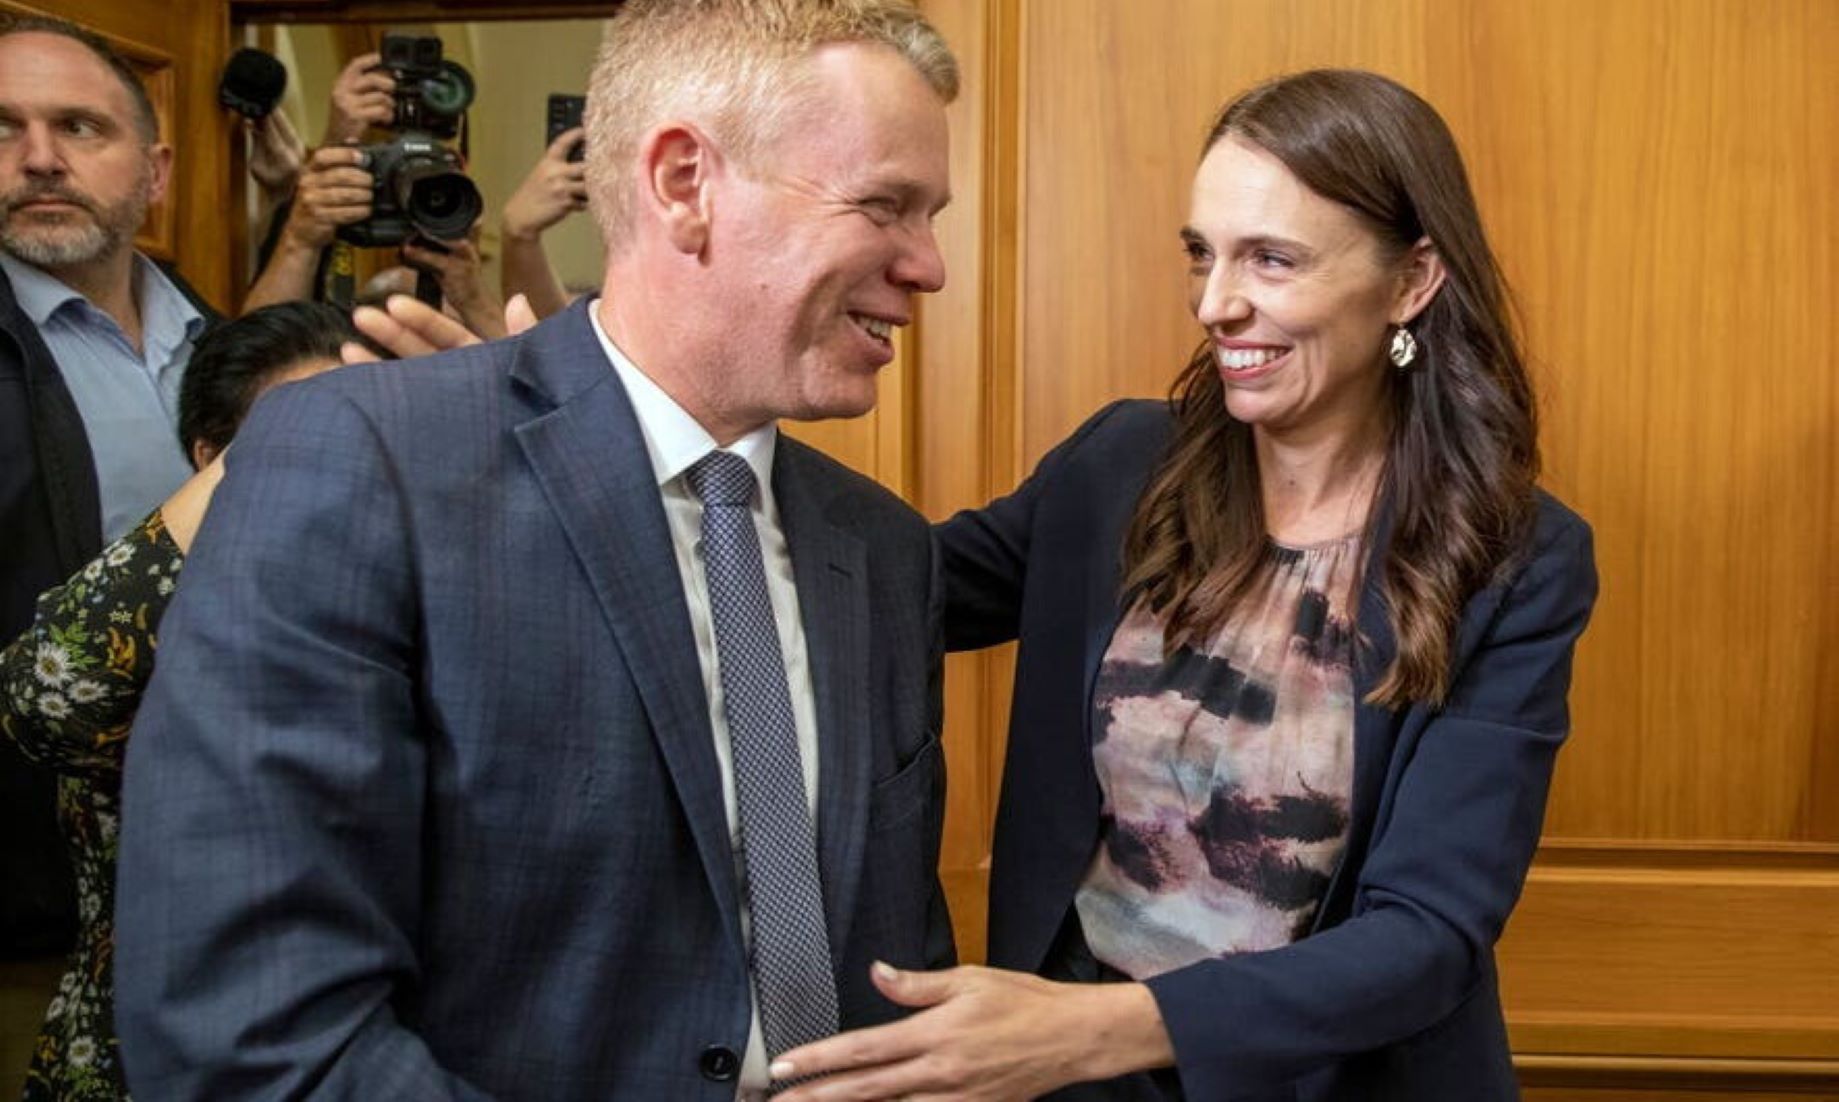 Chris Hipkins Confirmed New Zealand’s New PM, To Focus On Domestic Issues